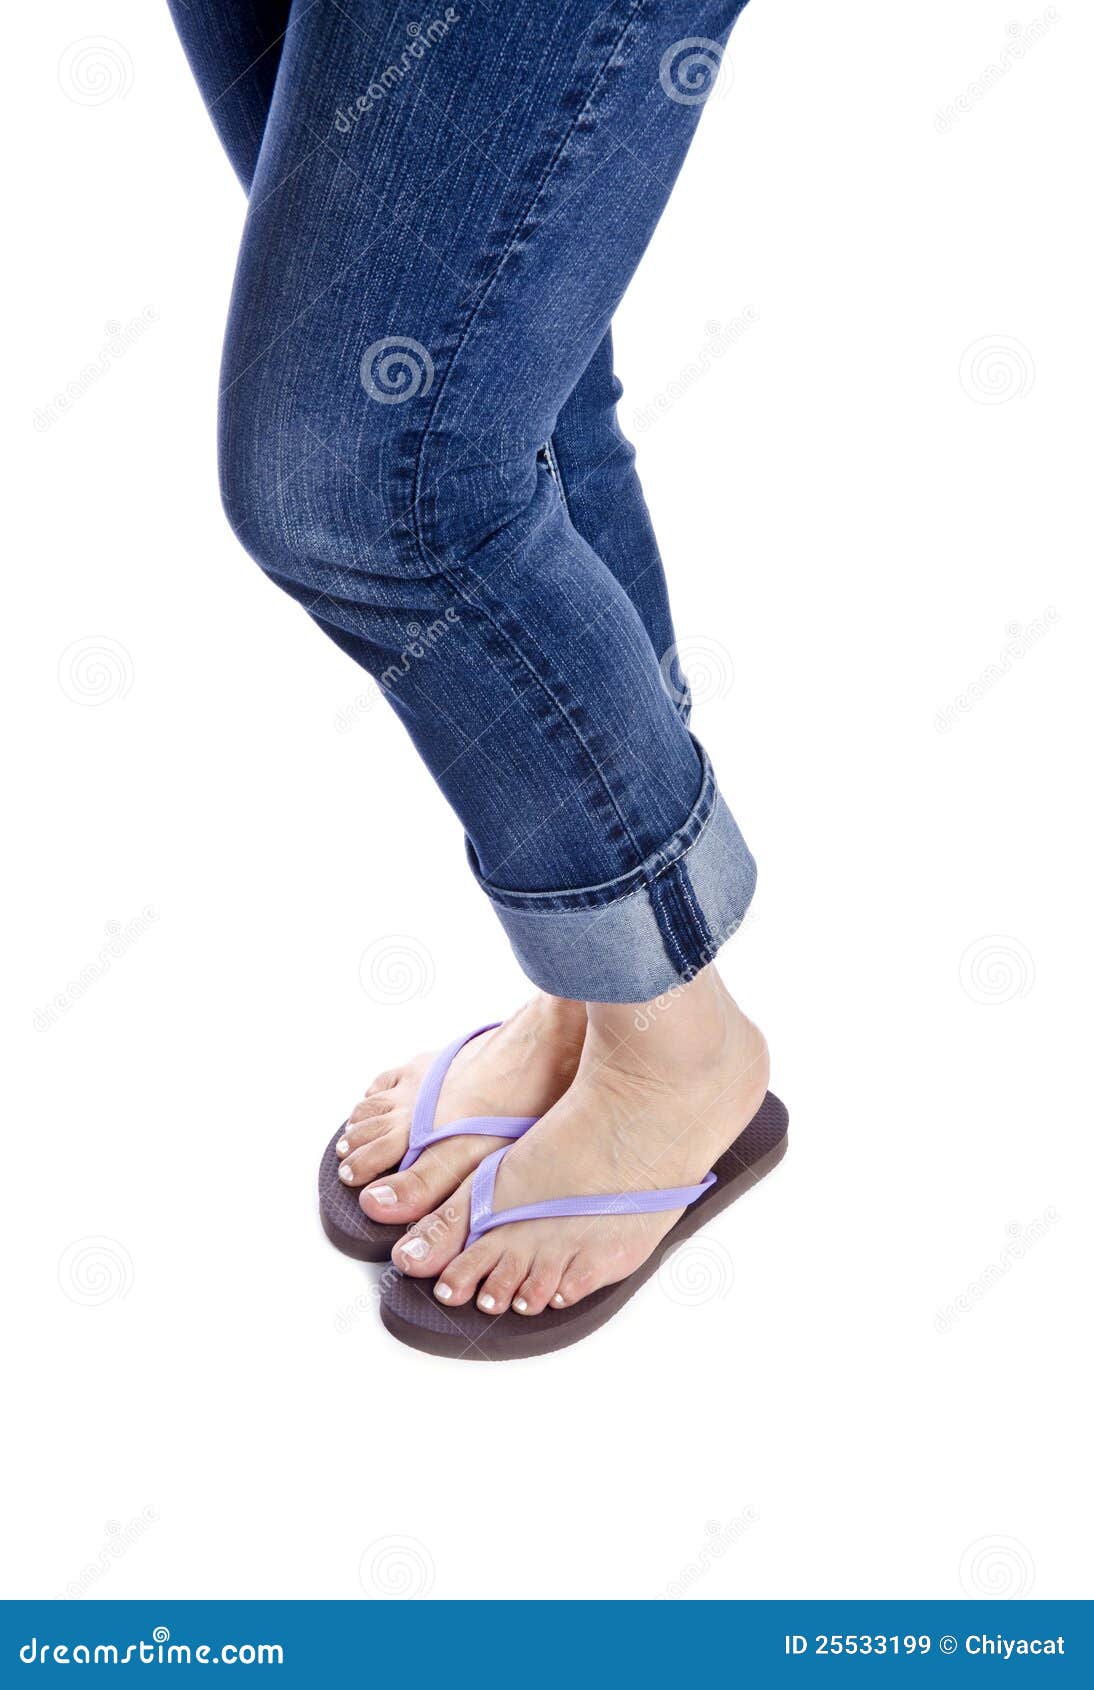 jeans and flip flops